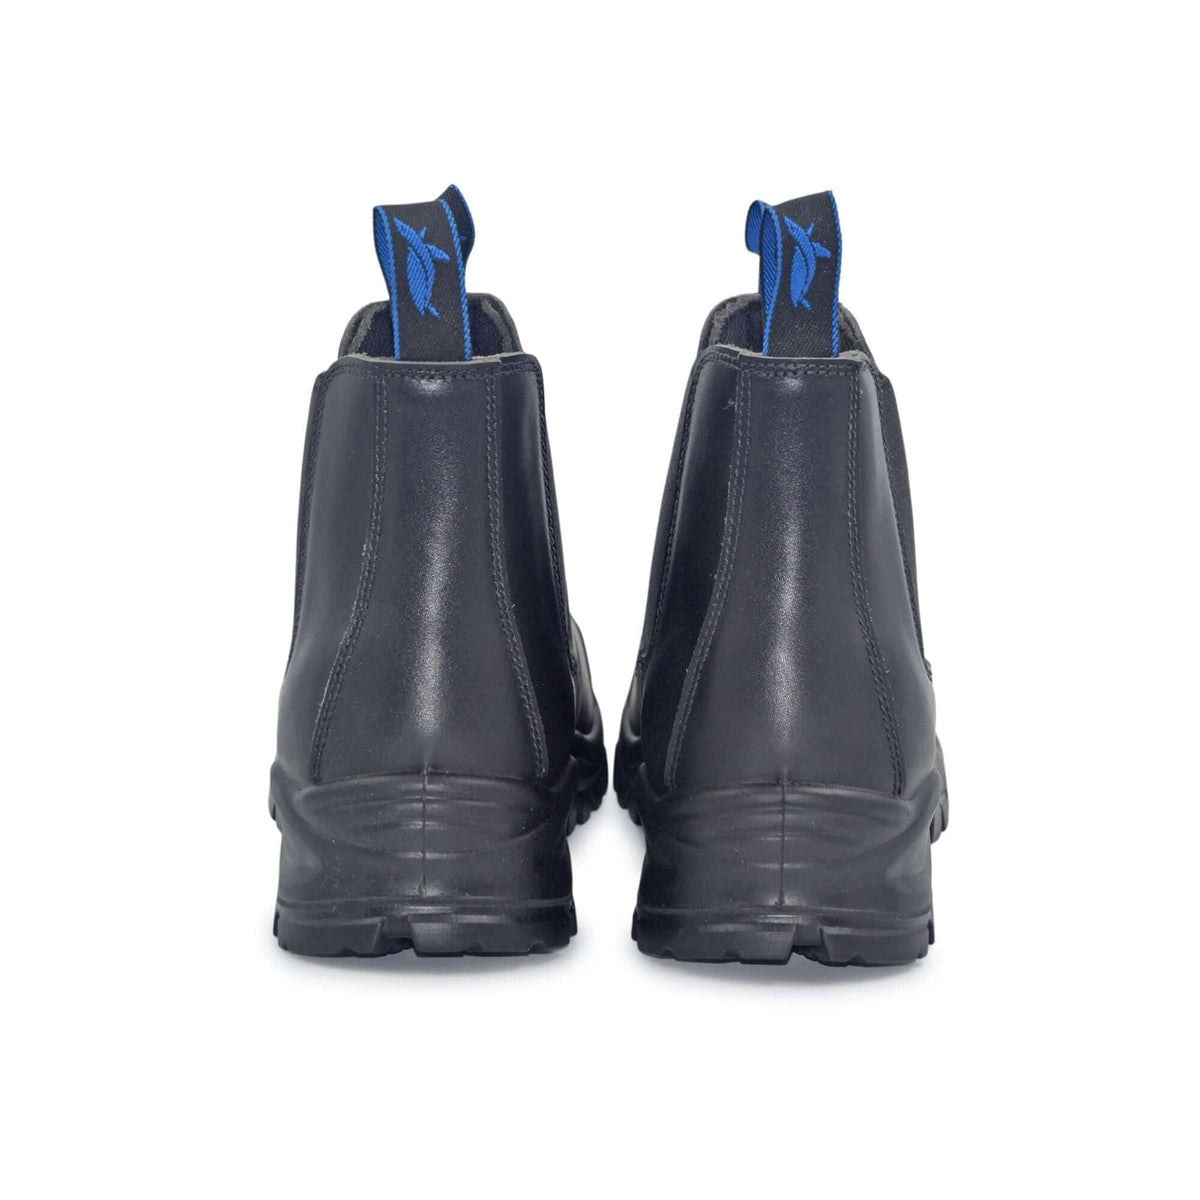 safety boots nz | safety shoes